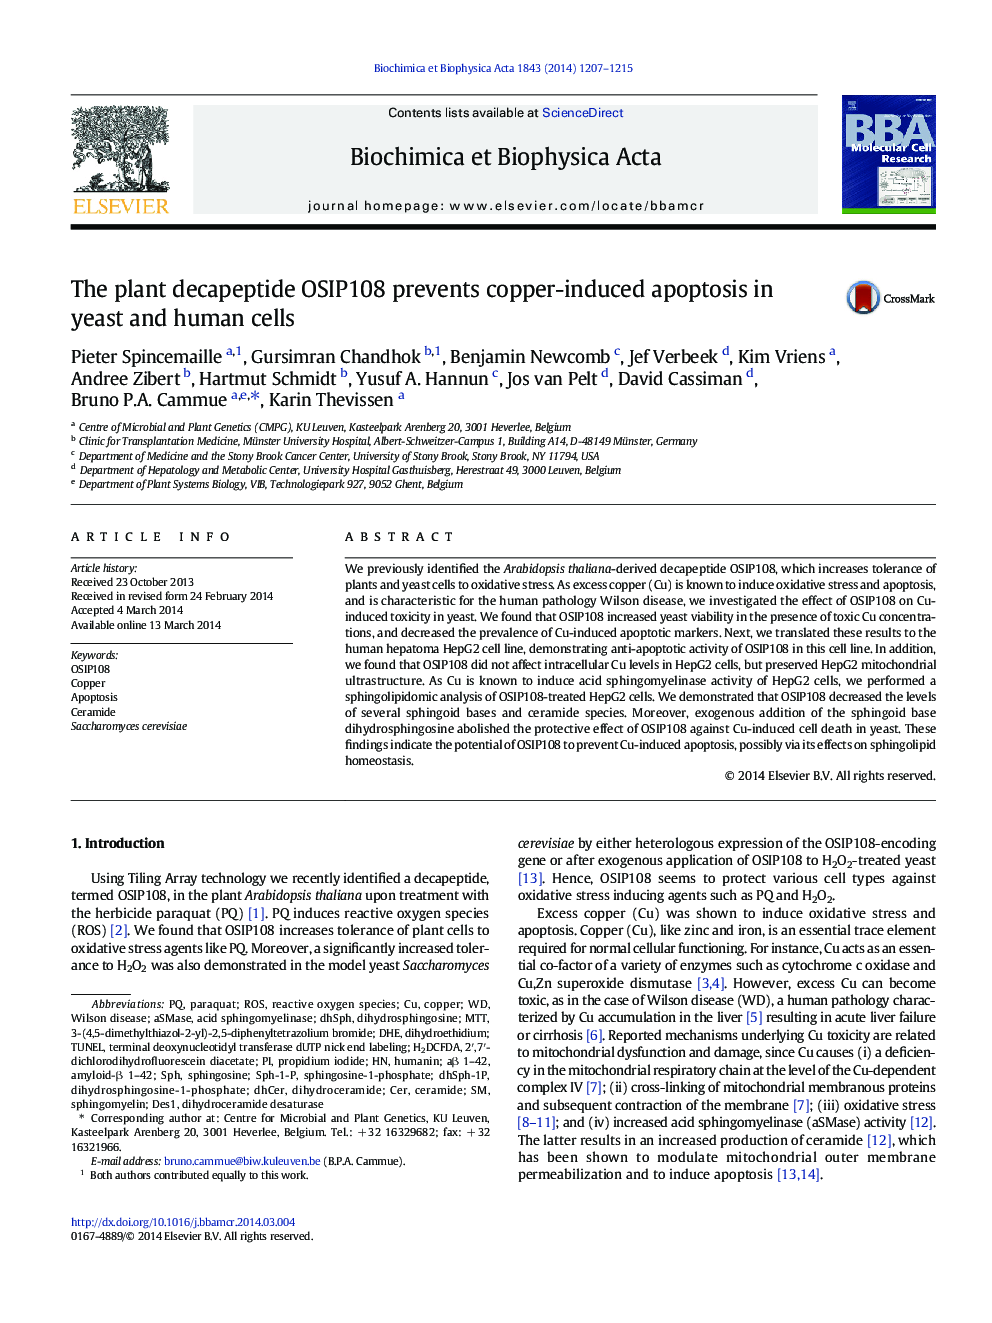 The plant decapeptide OSIP108 prevents copper-induced apoptosis in yeast and human cells